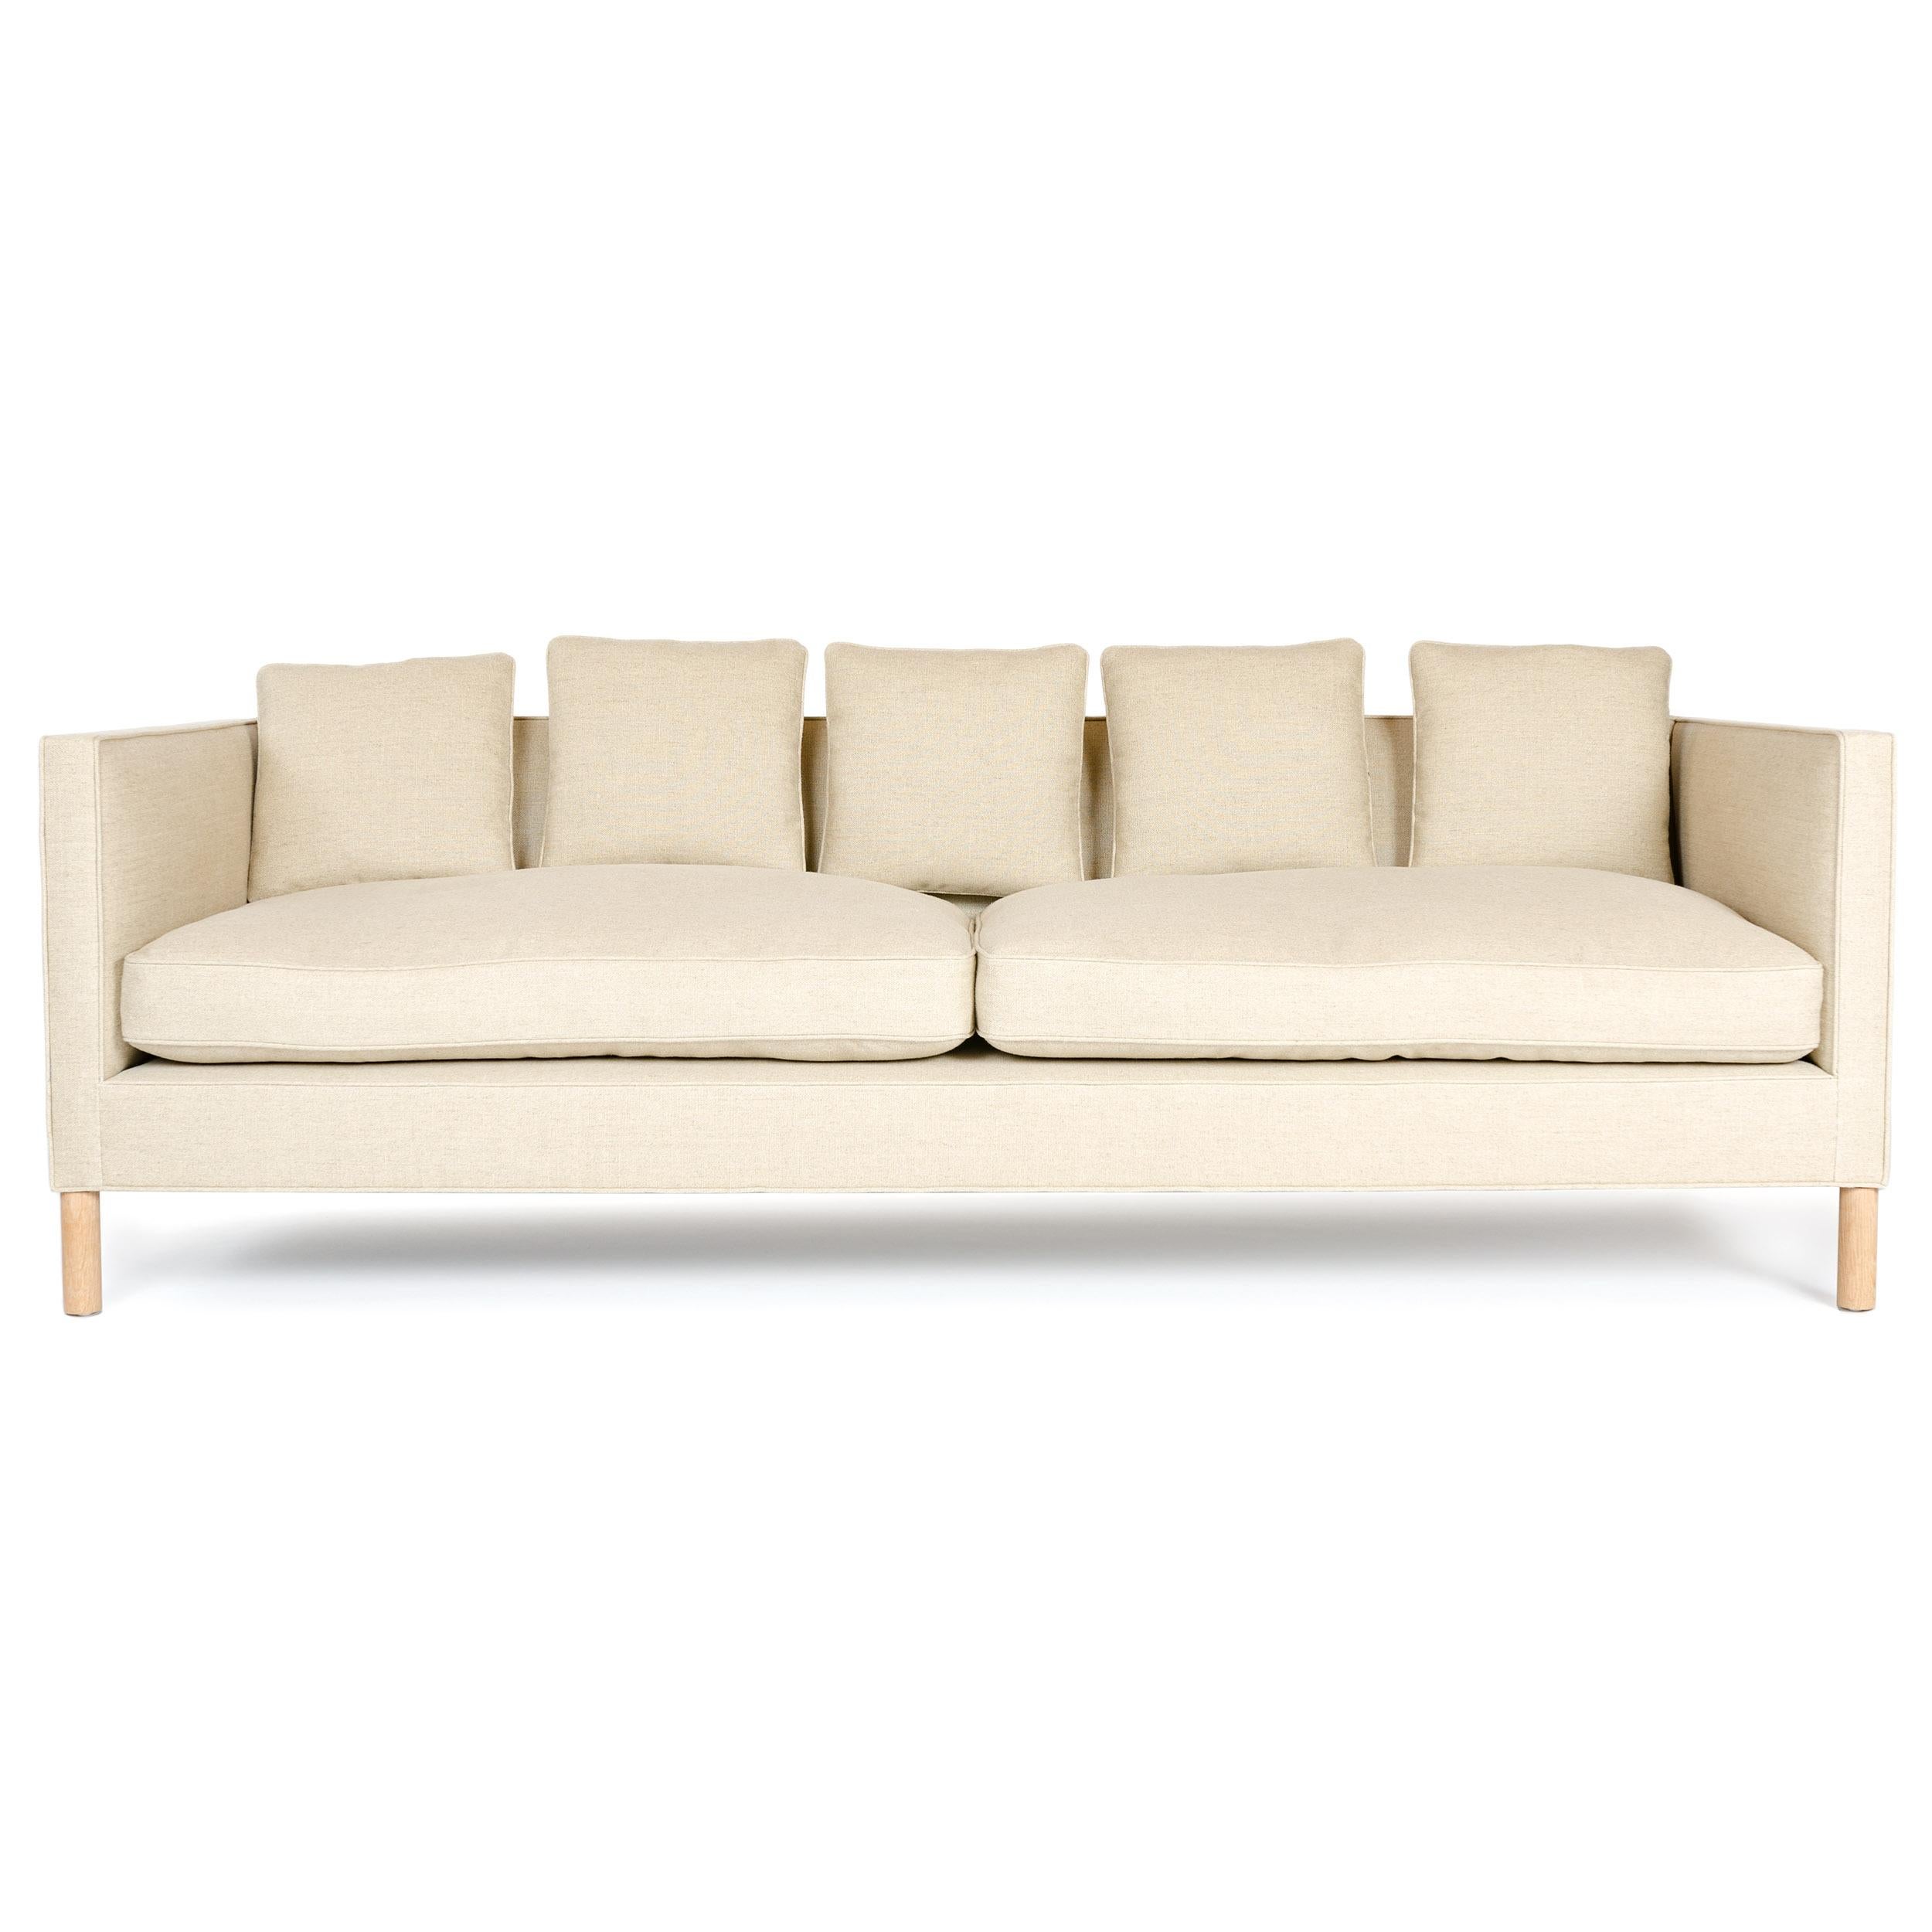 A minimal tuxedo sofa with solid wood frame and hand tied springs having down-filled cushions and pillow backs upholstered in natural linen.
 